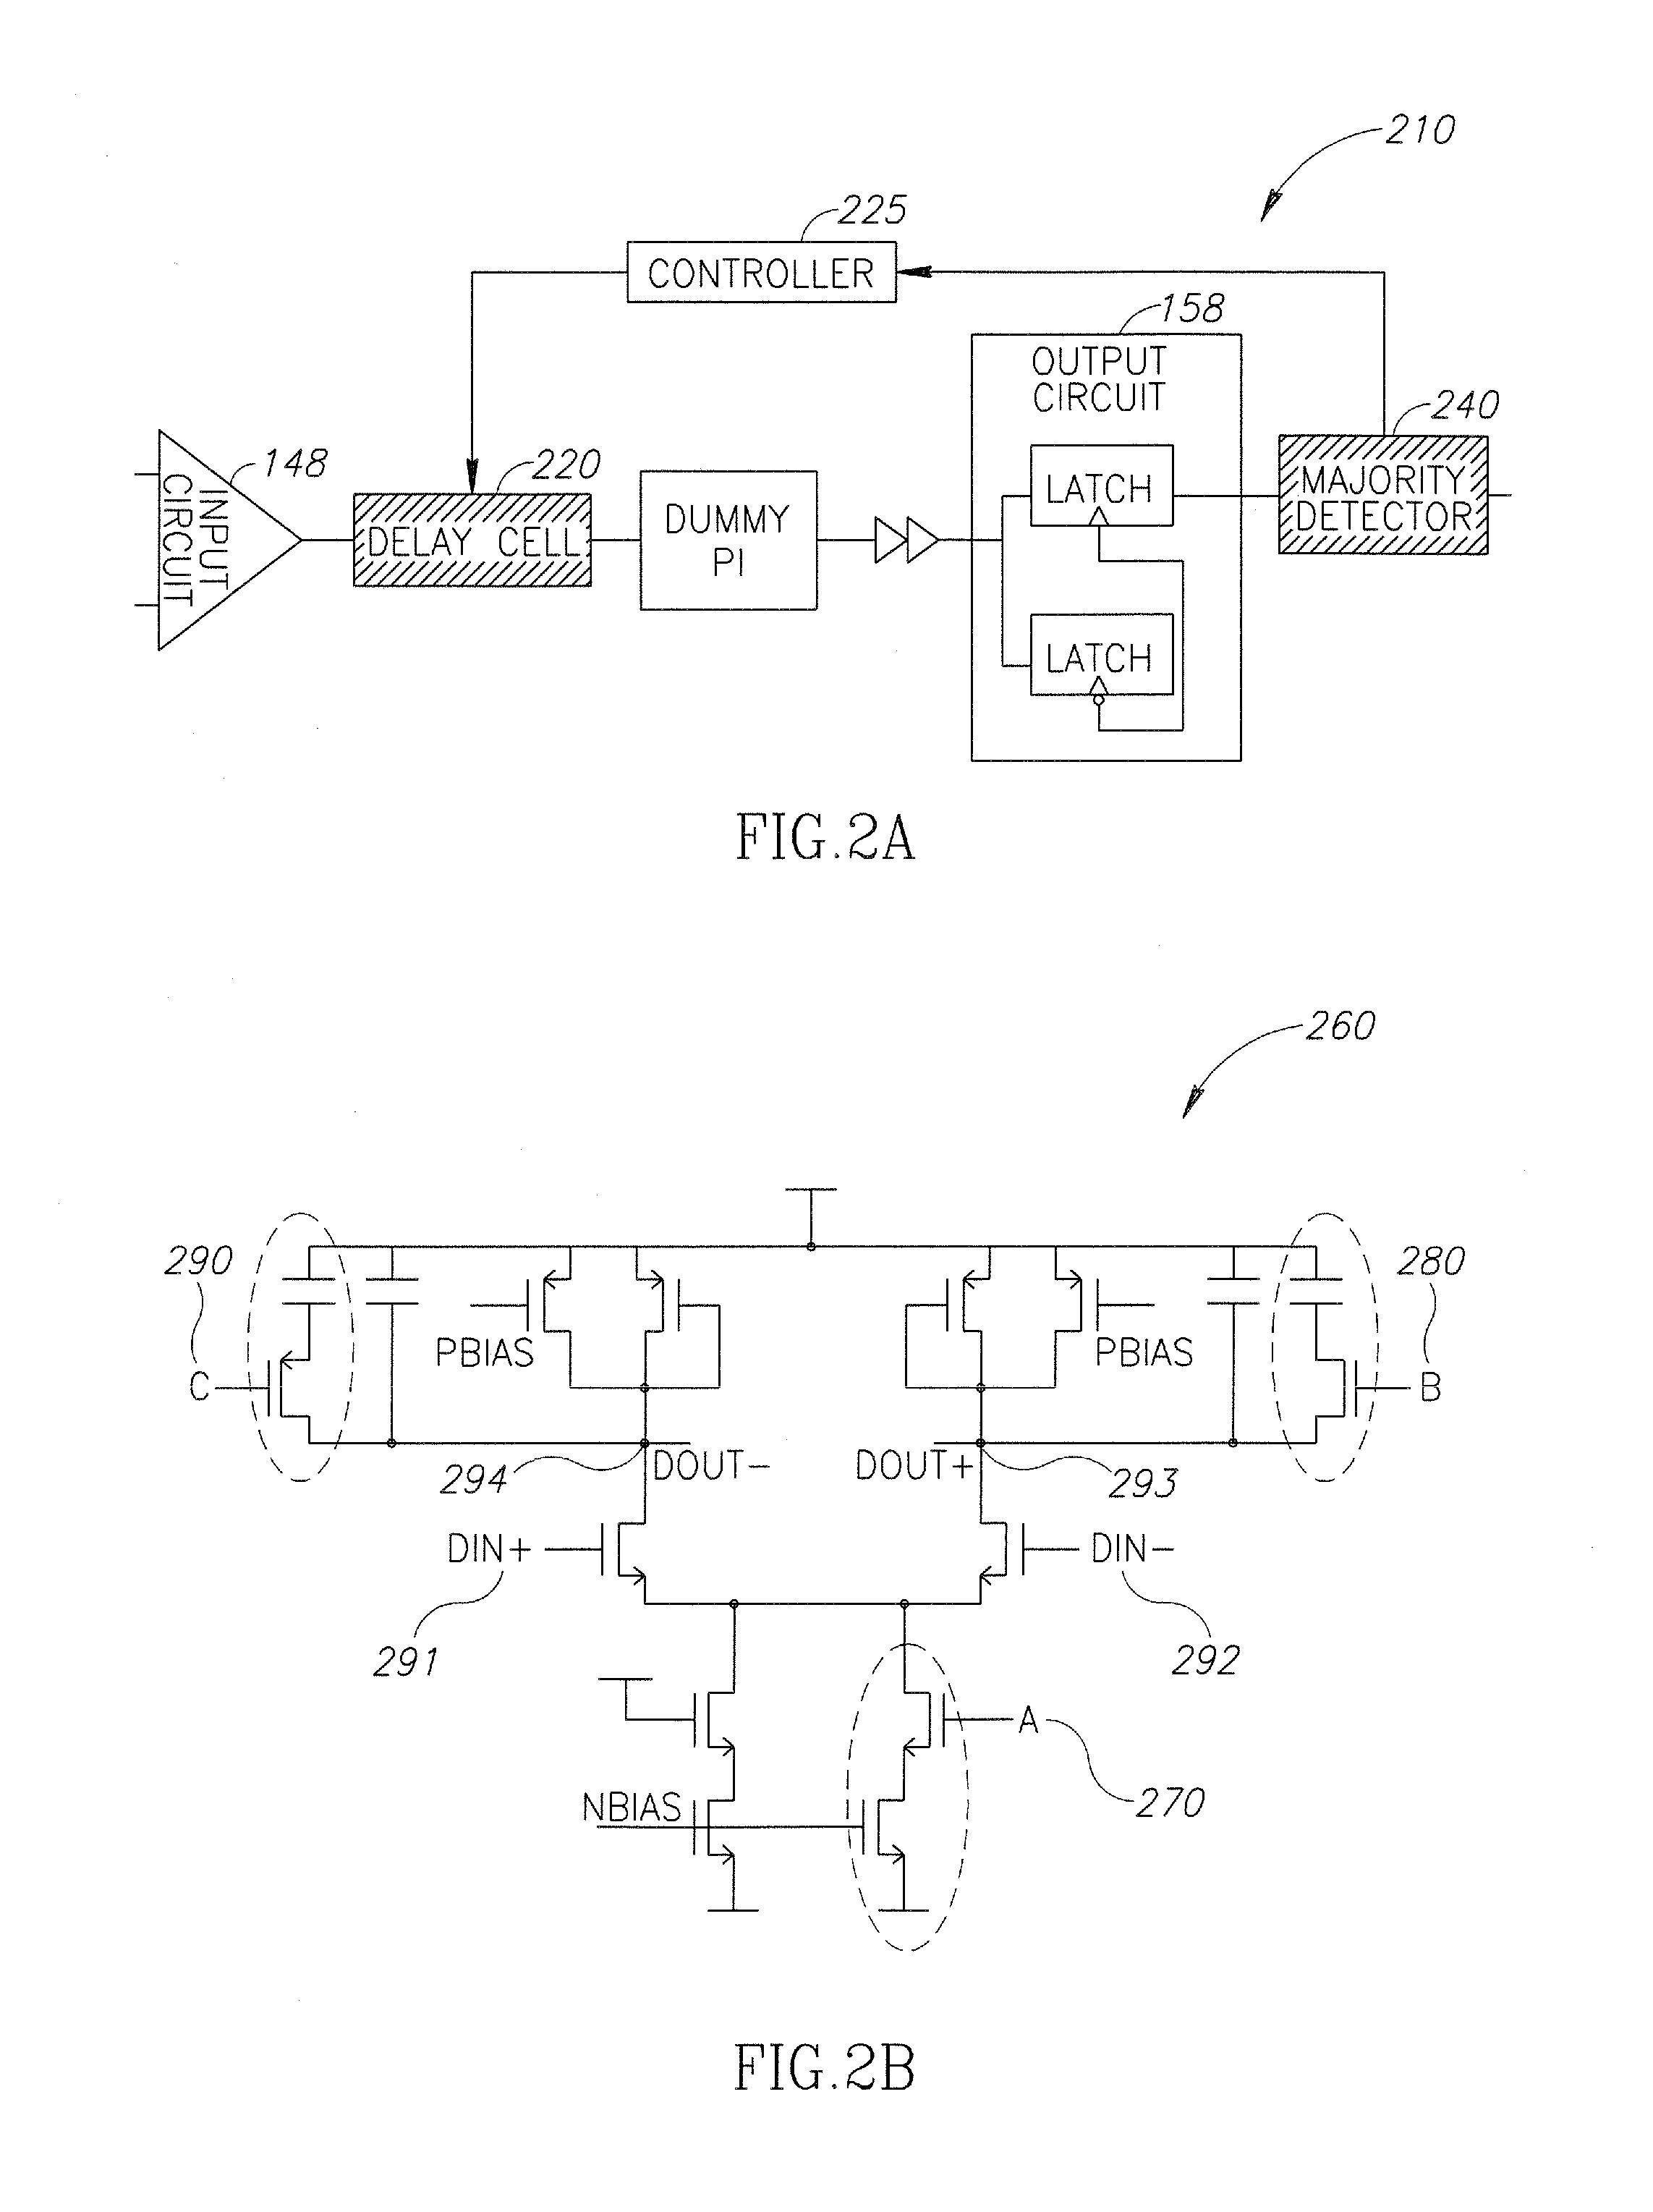 Apparatus, system, and method for bitwise deskewing